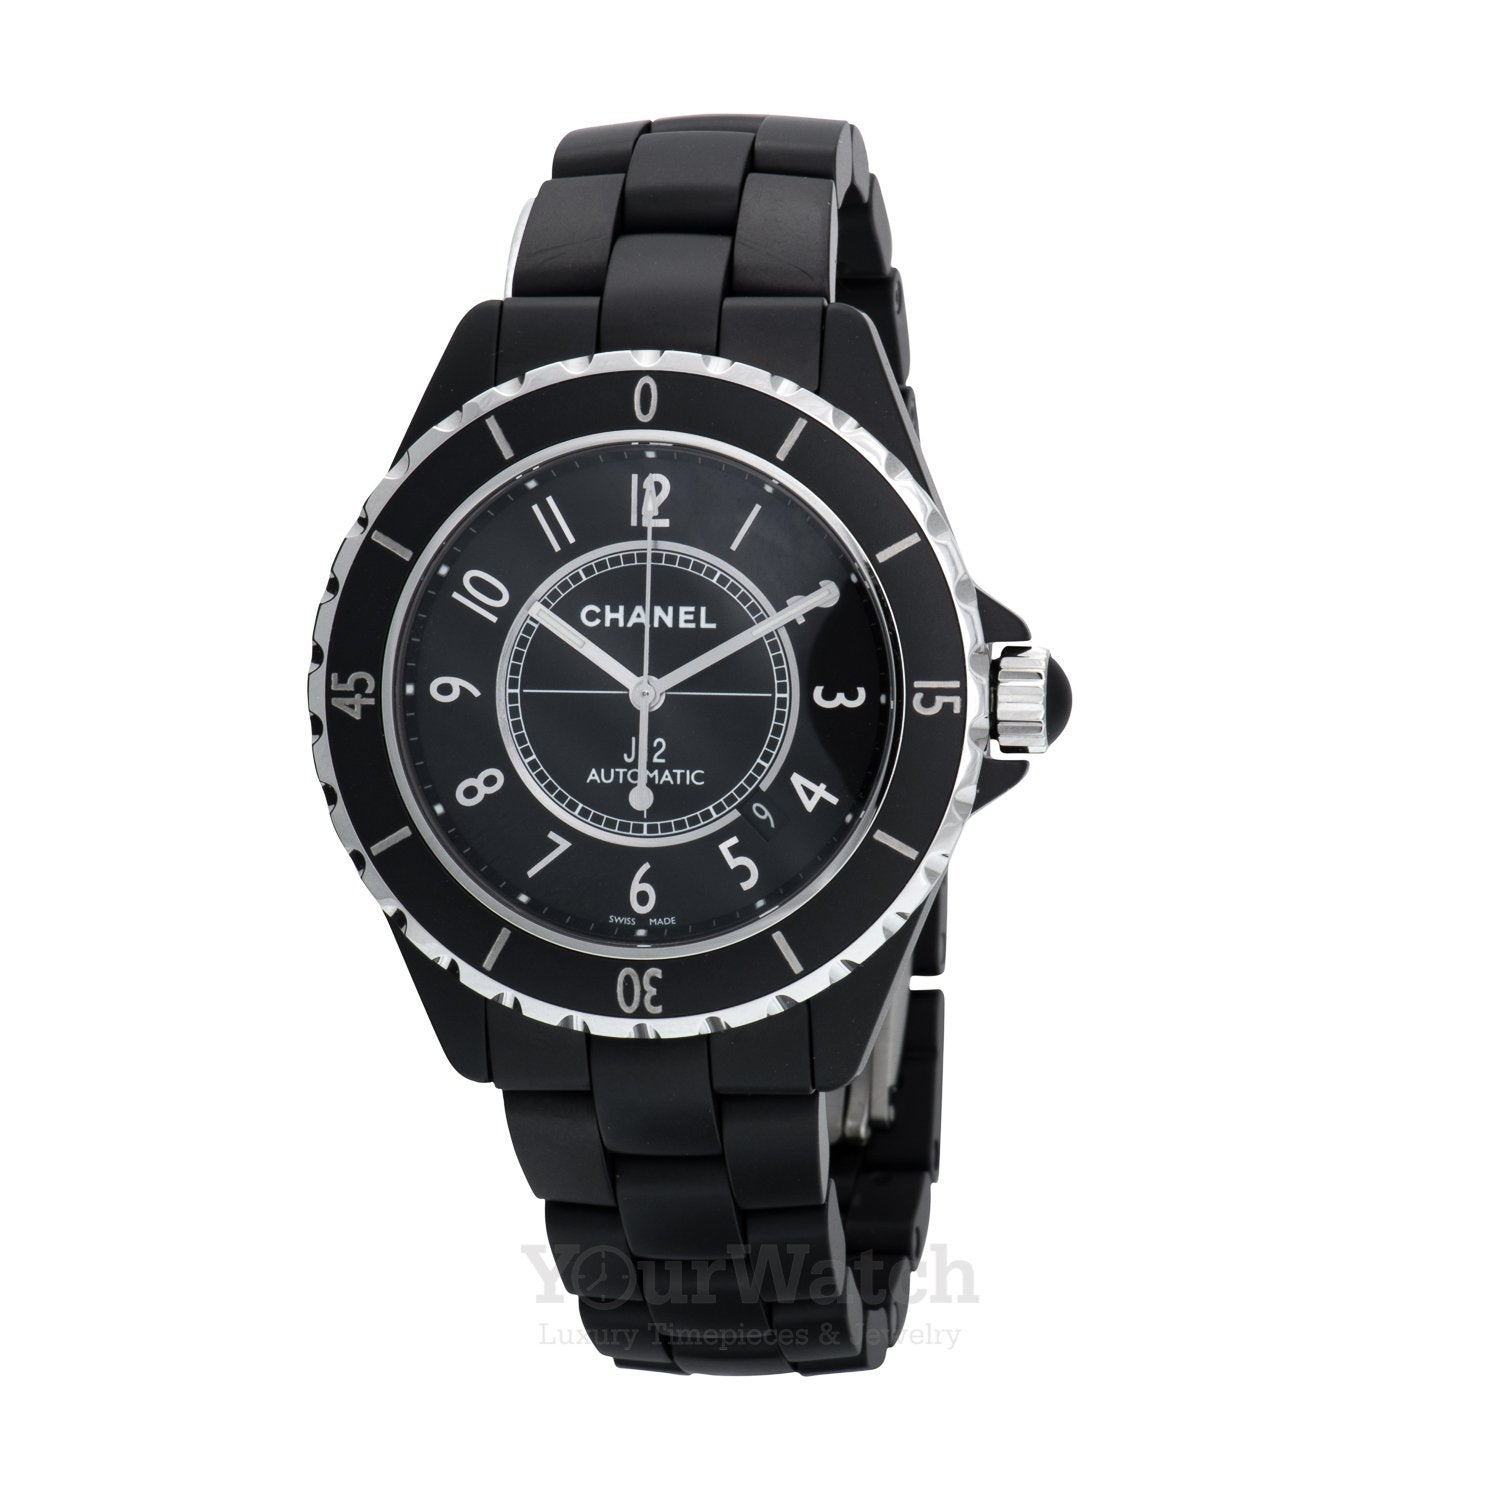 Chanel Watches  Yourwatch  Authentic Swiss Watches Always in Stock